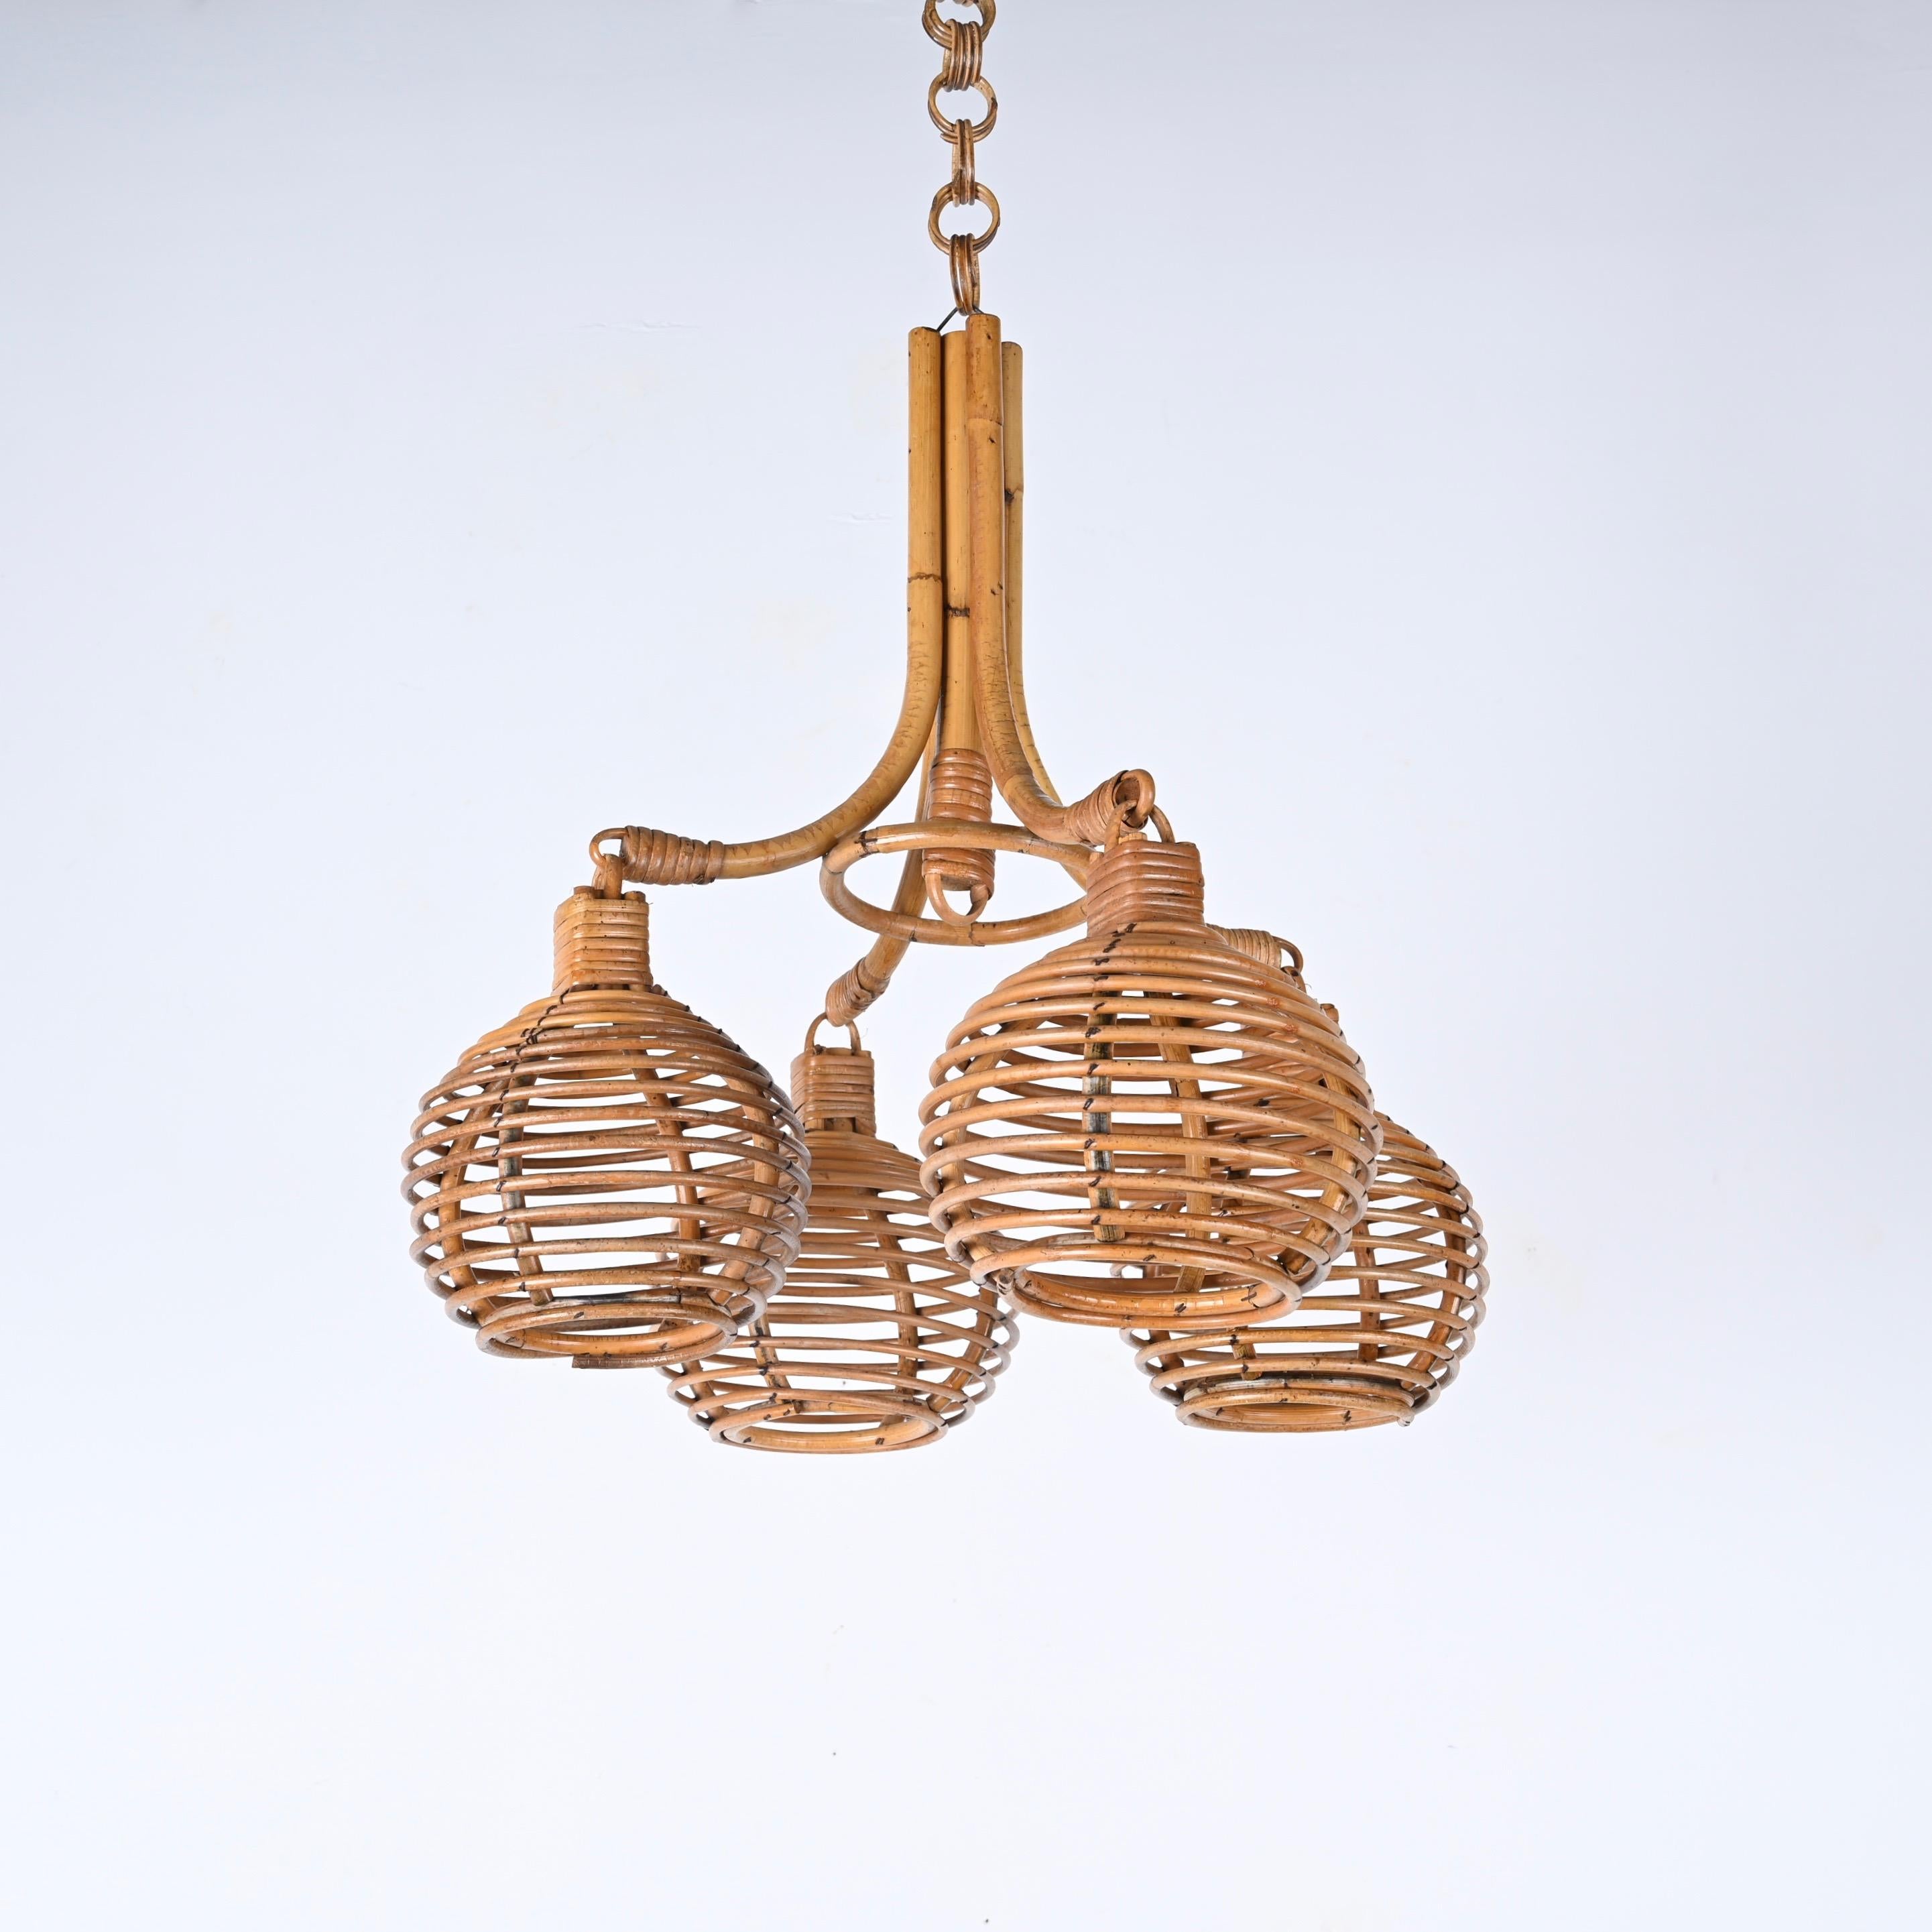 Midcentury French Riviera Bambo and Rattan 4 Sphere Italian Chandelier, 1960s 12